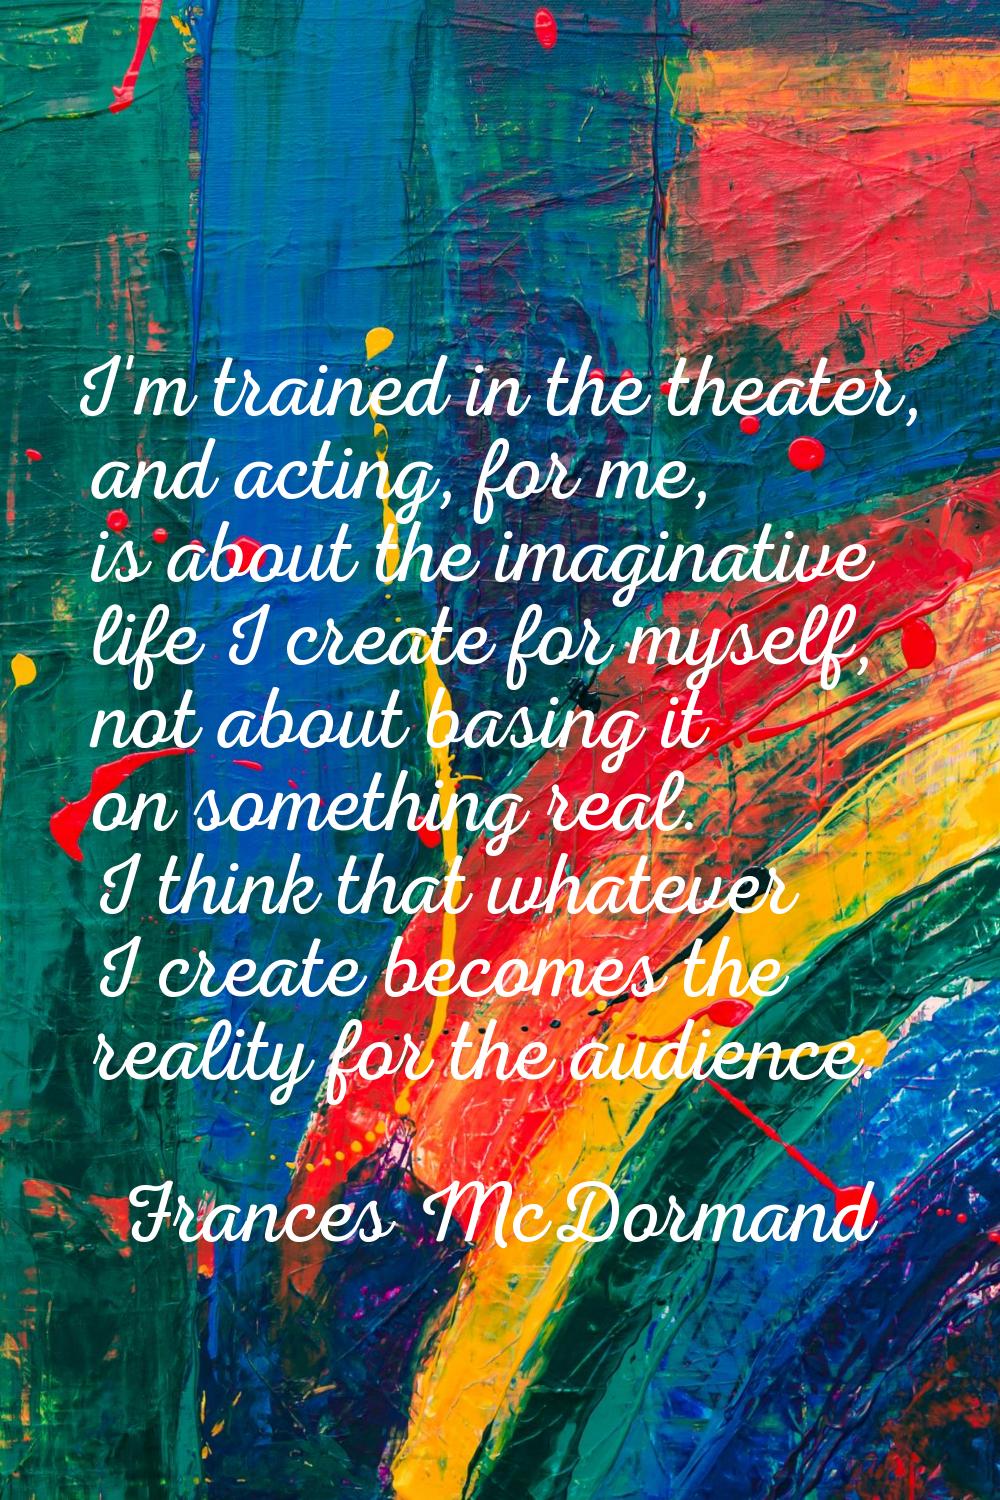 I'm trained in the theater, and acting, for me, is about the imaginative life I create for myself, 